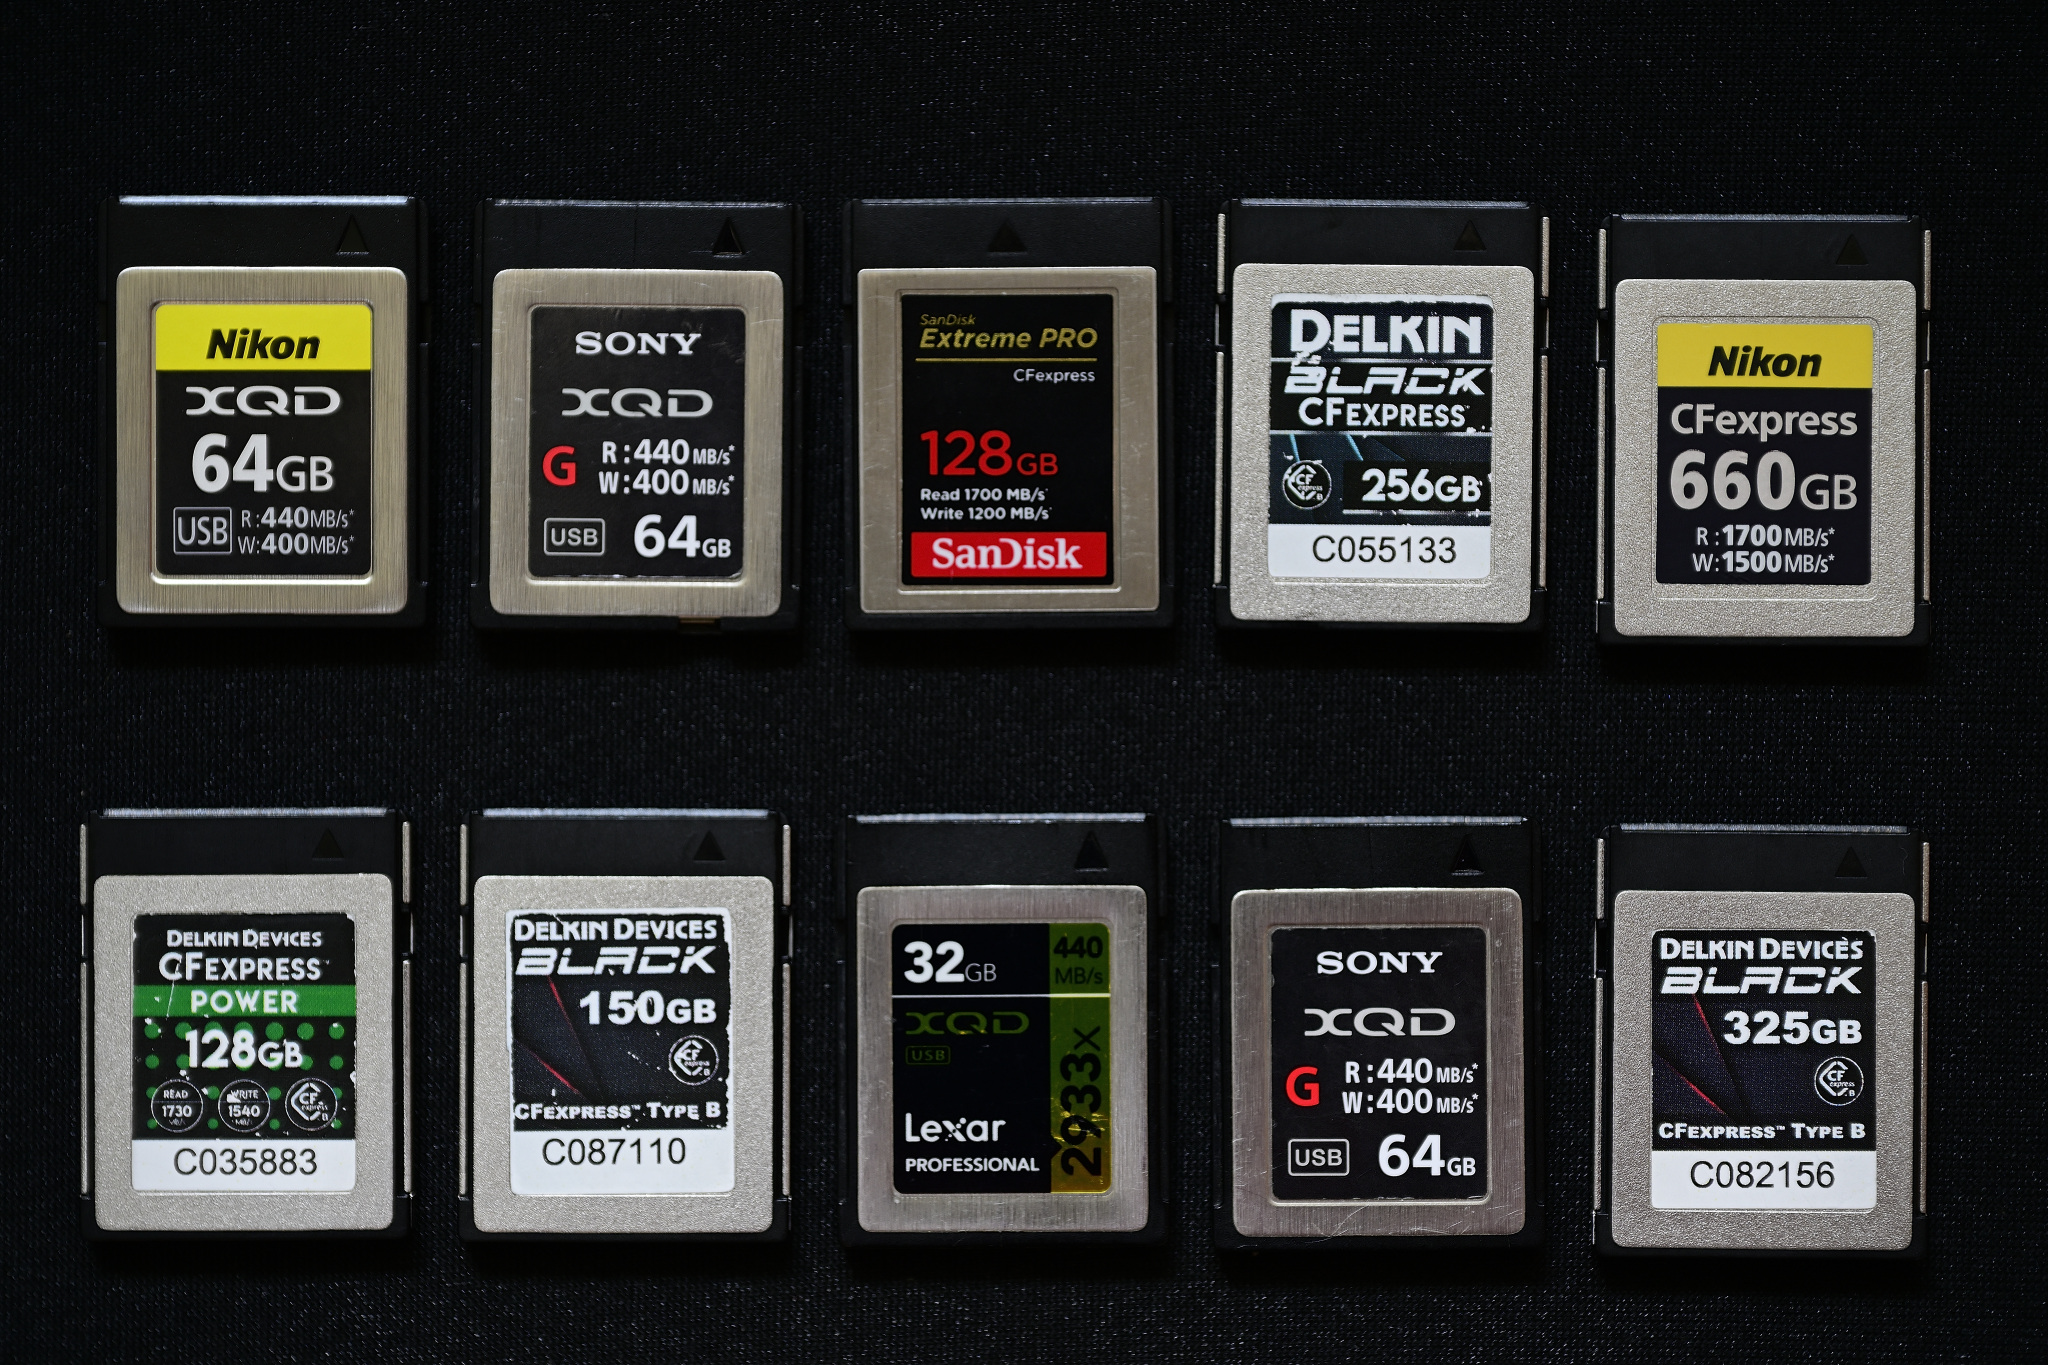 SanDisk Extreme Pro 200MB/s 256GB SDXC Memory Card Review - Camera Memory  Speed Comparison & Performance tests for SD and CF cards